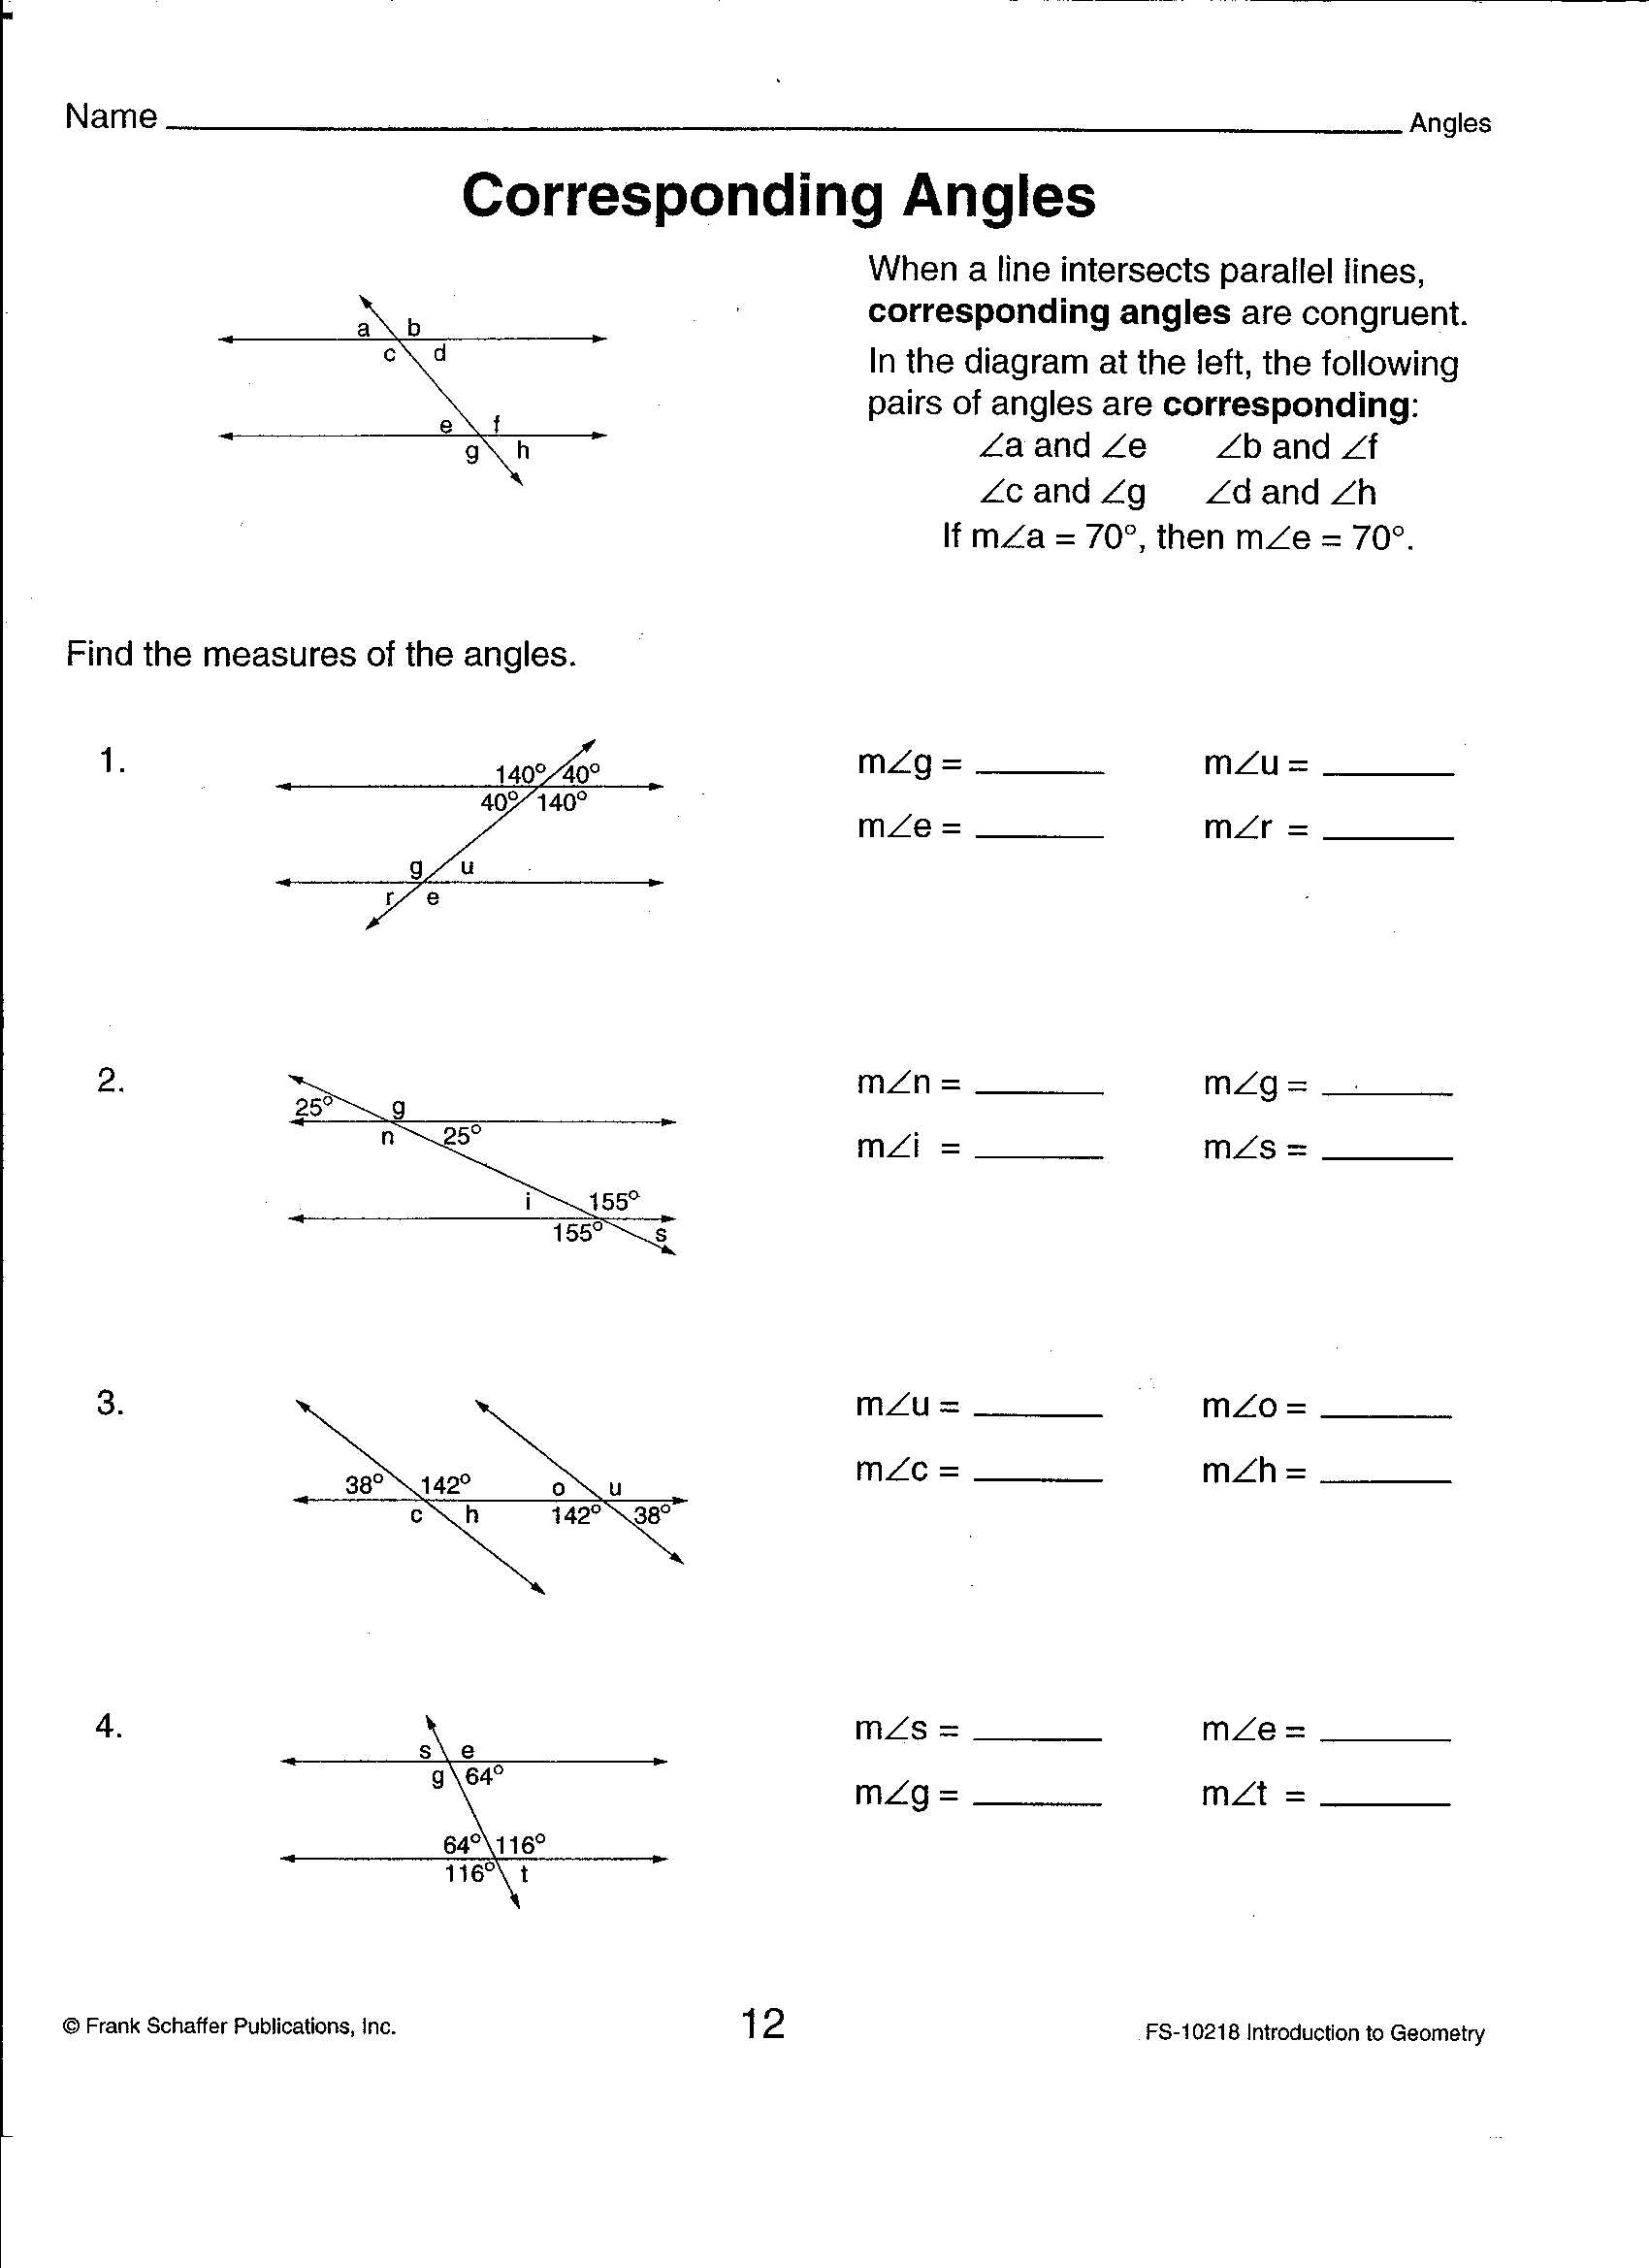 Proving Parallel Lines Worksheet with Answers Along with Proving Parallel Lines Worksheet with Answers